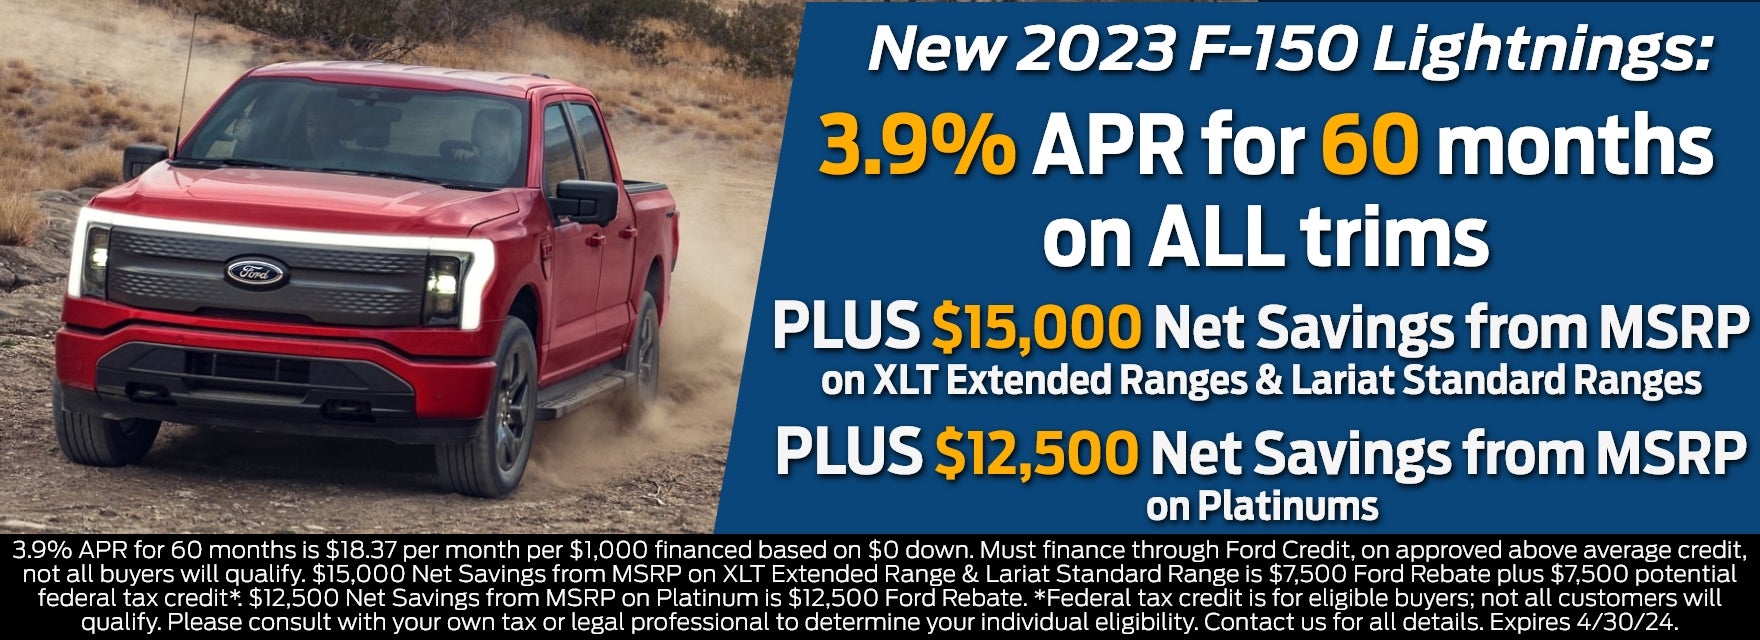 New 2023 F-150 Lightnings 3.9 APR for 60 months on all trims